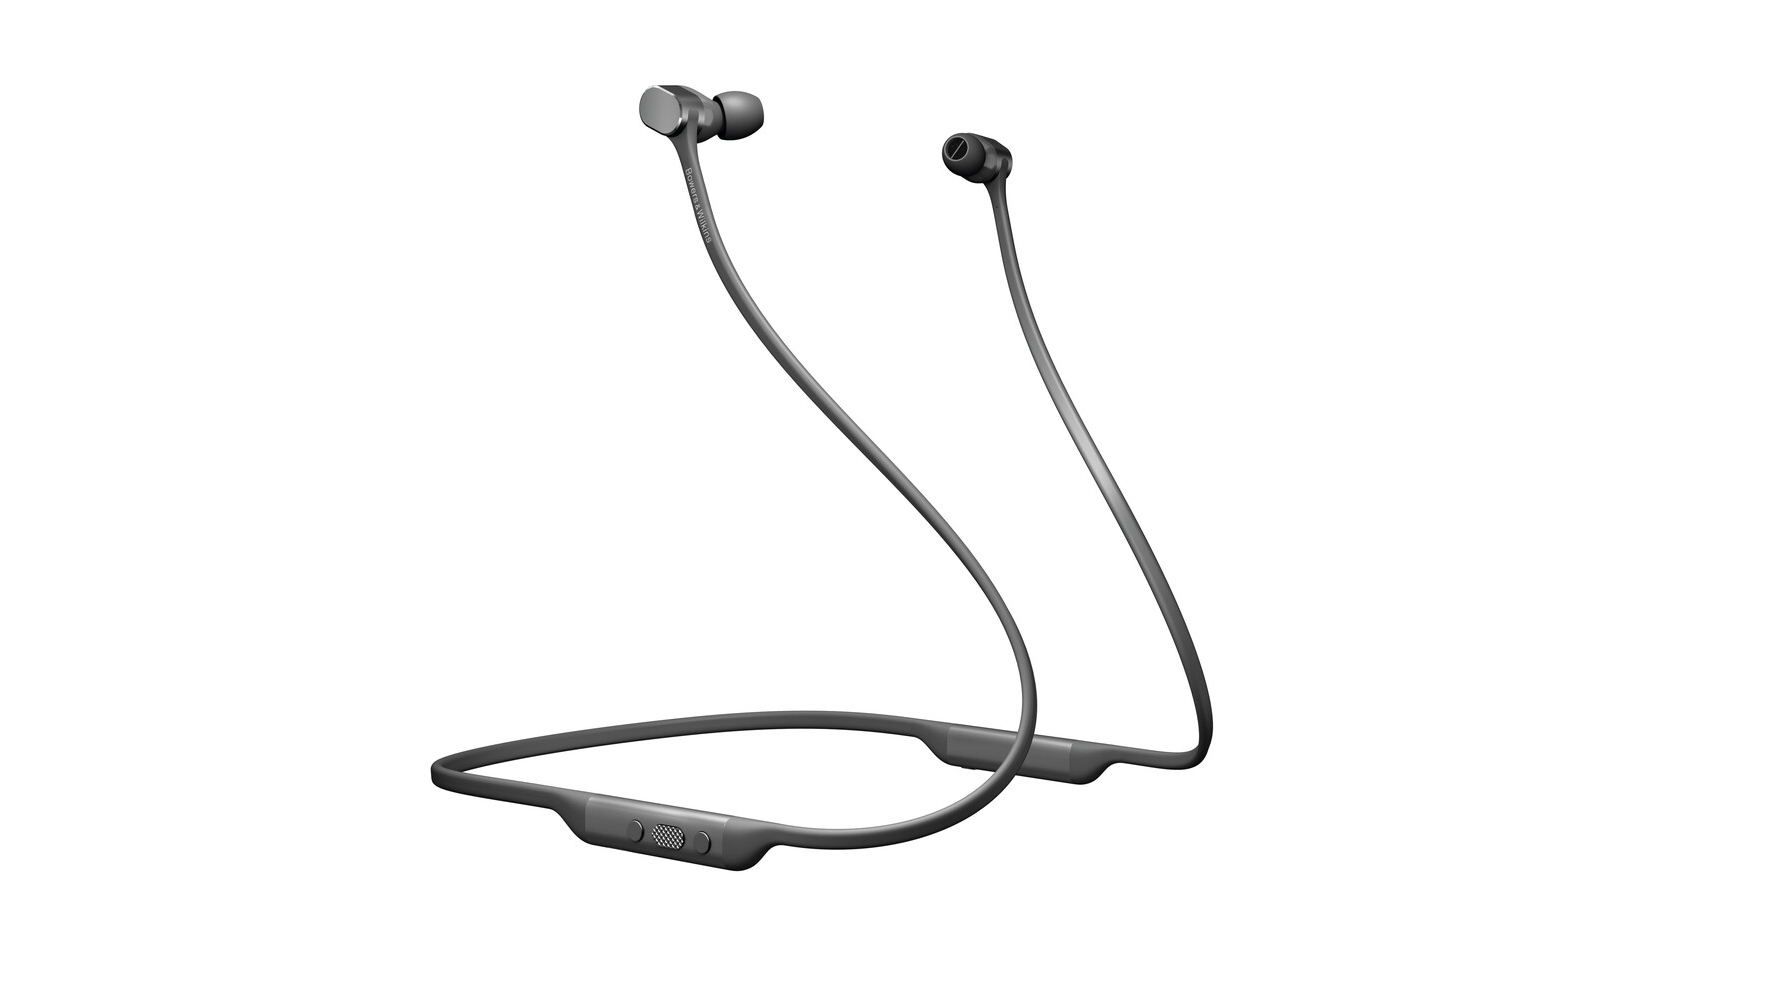 the Bowers & Wilkins PI3 Wireless Headphones in gray